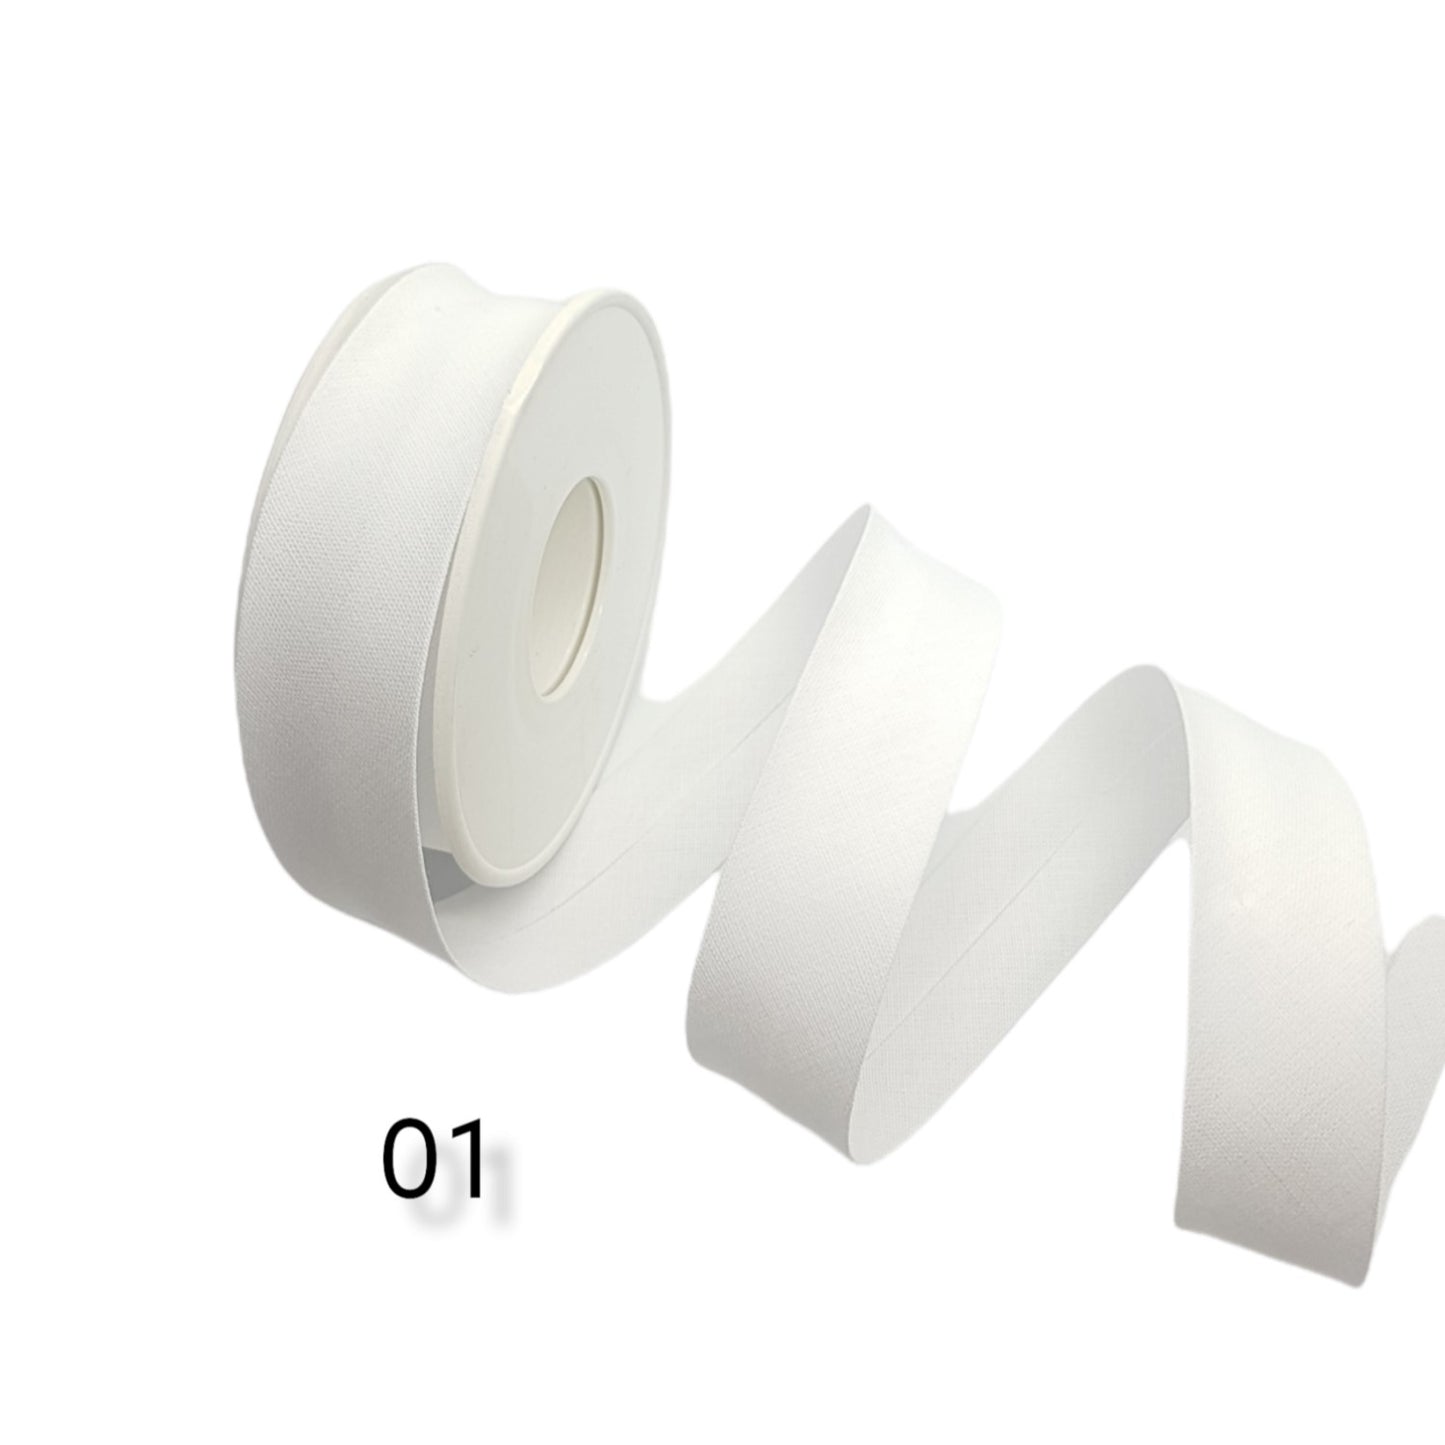 hobby trendy 100% cotton bias binding tape (single fold) 20mm-13/16inch (5meters- 5.46yards) for sewing, seaming, binding, hemming, piping, quilting 01 white